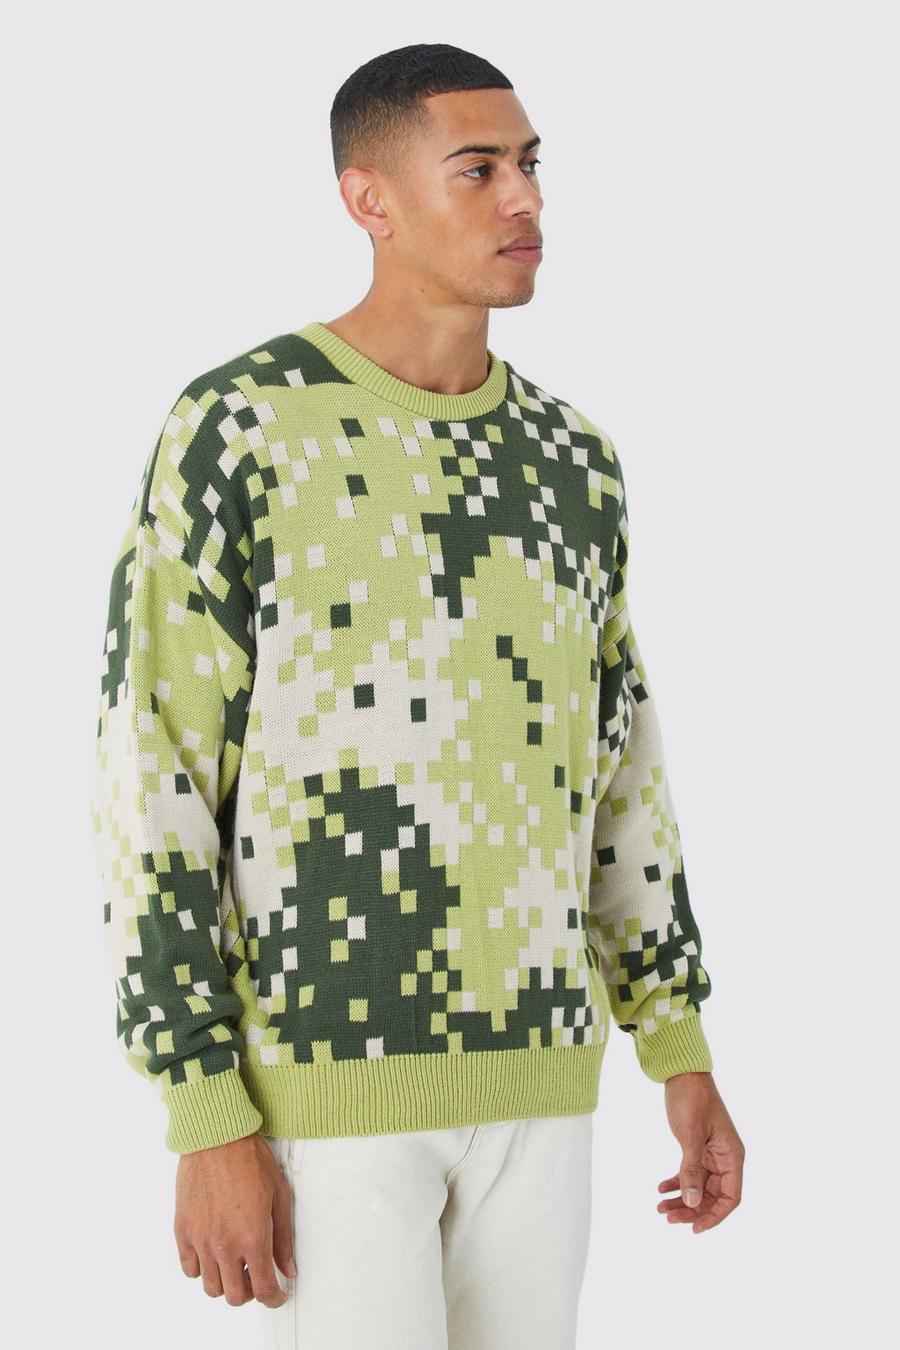 Green Oversized Pixelated Camo Knitted Jumper